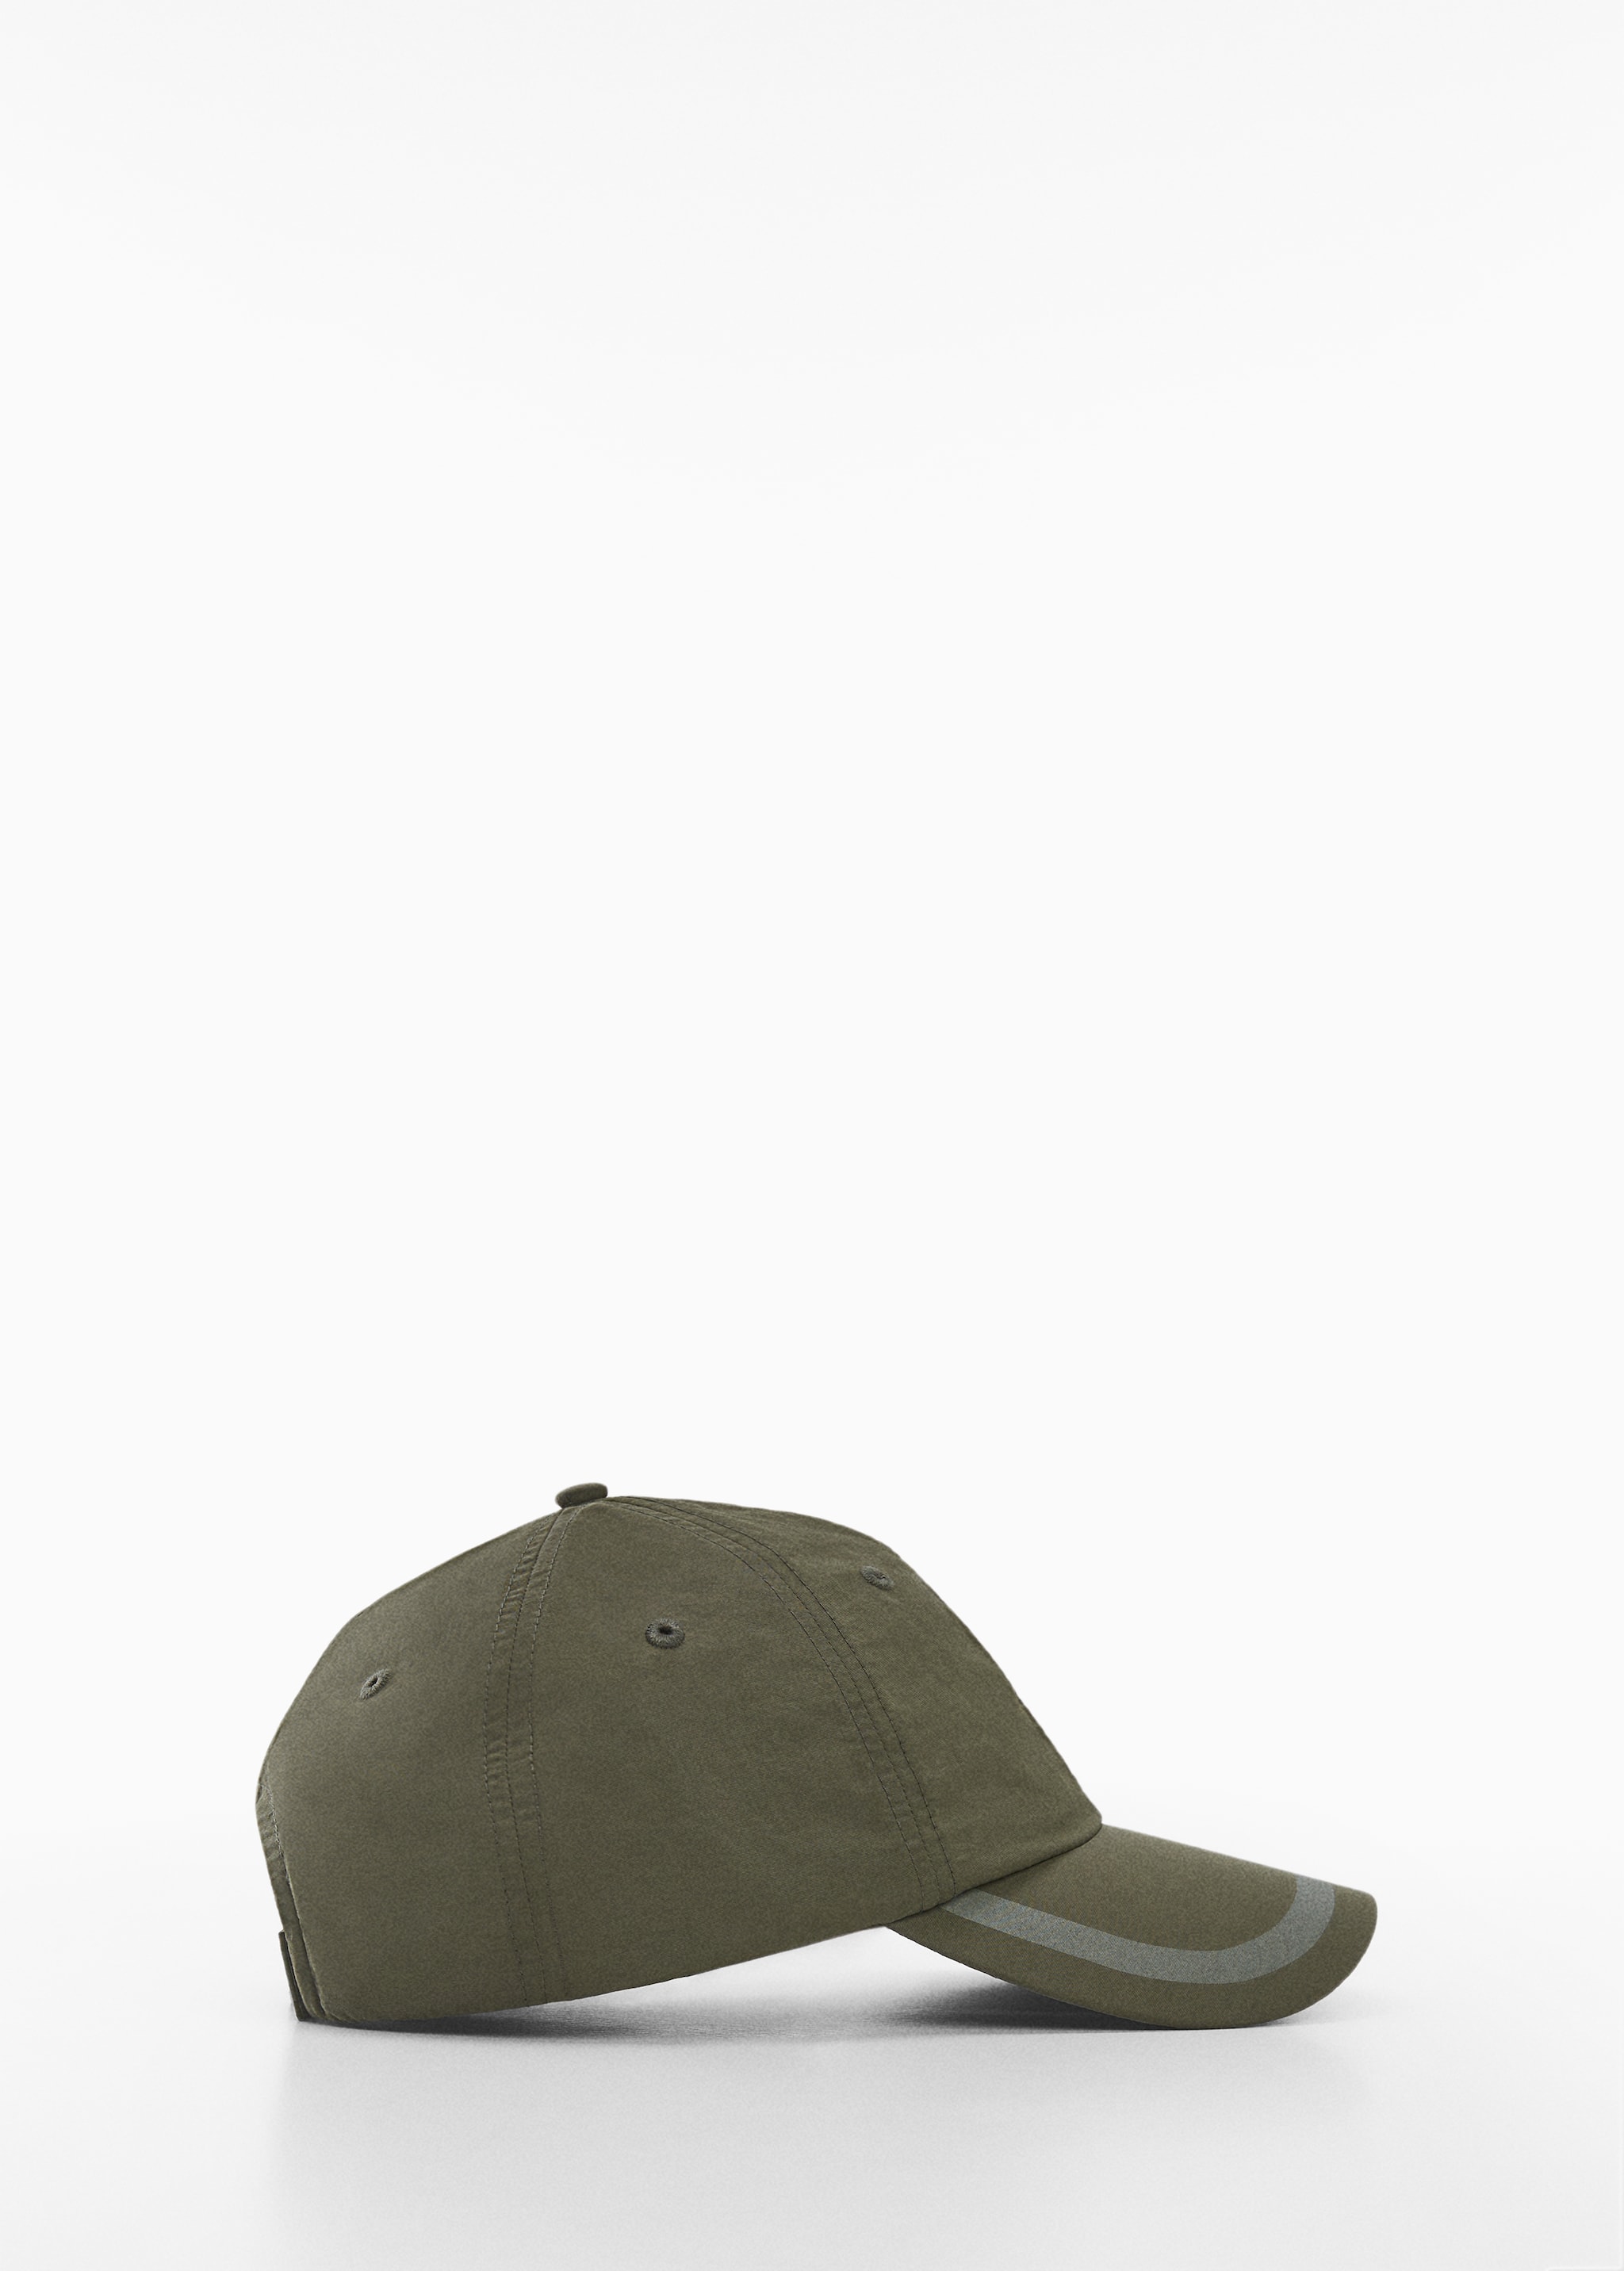 Nylon cap - Article without model